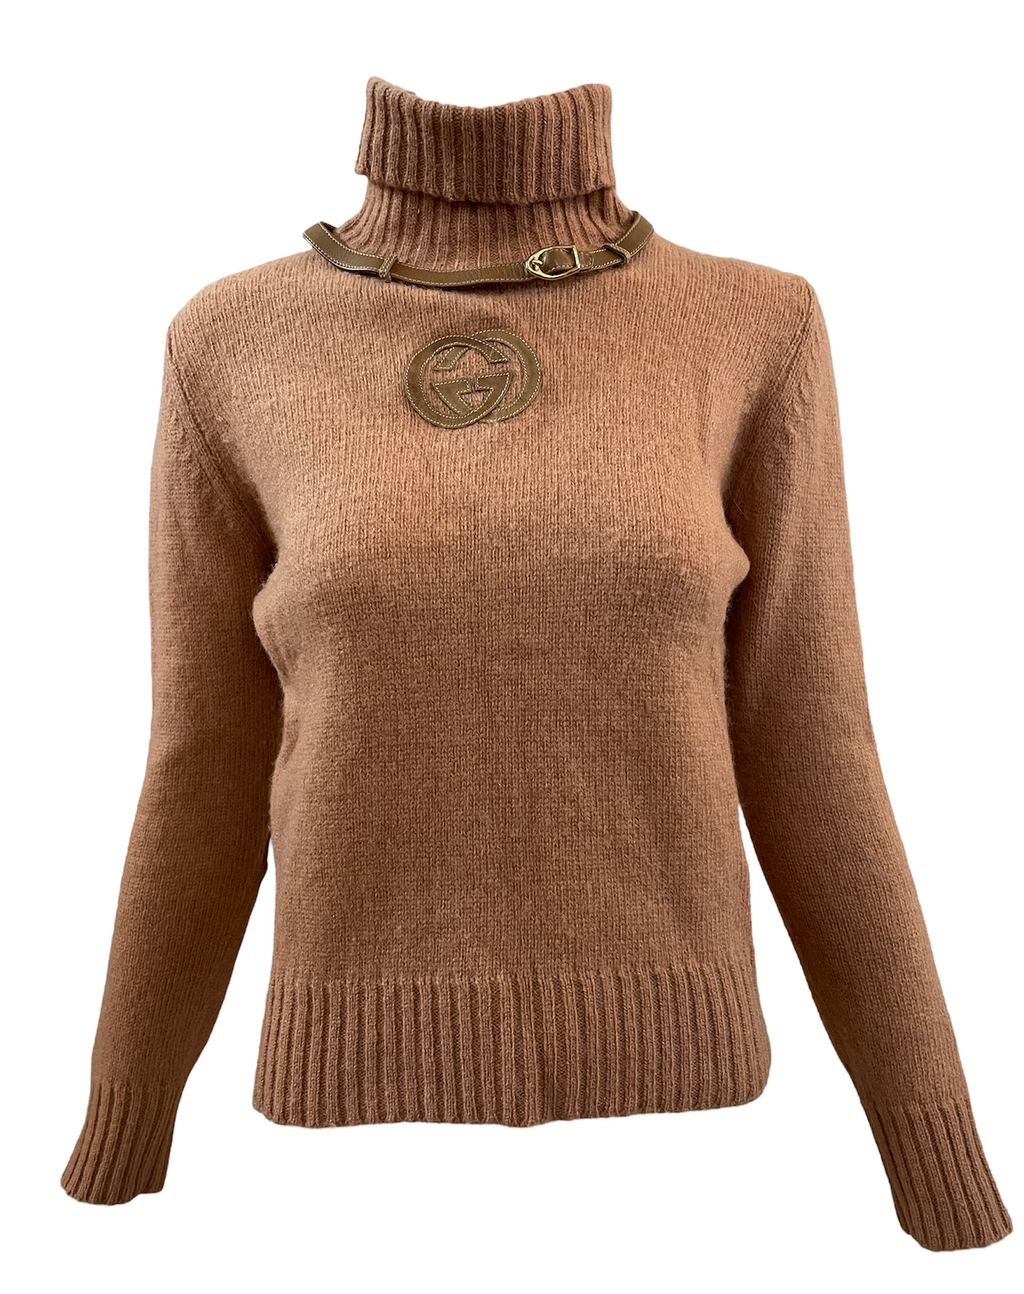  Gucci 70s Caramel Colored Wool Turtleneck Sweater FRONT 1 of 5